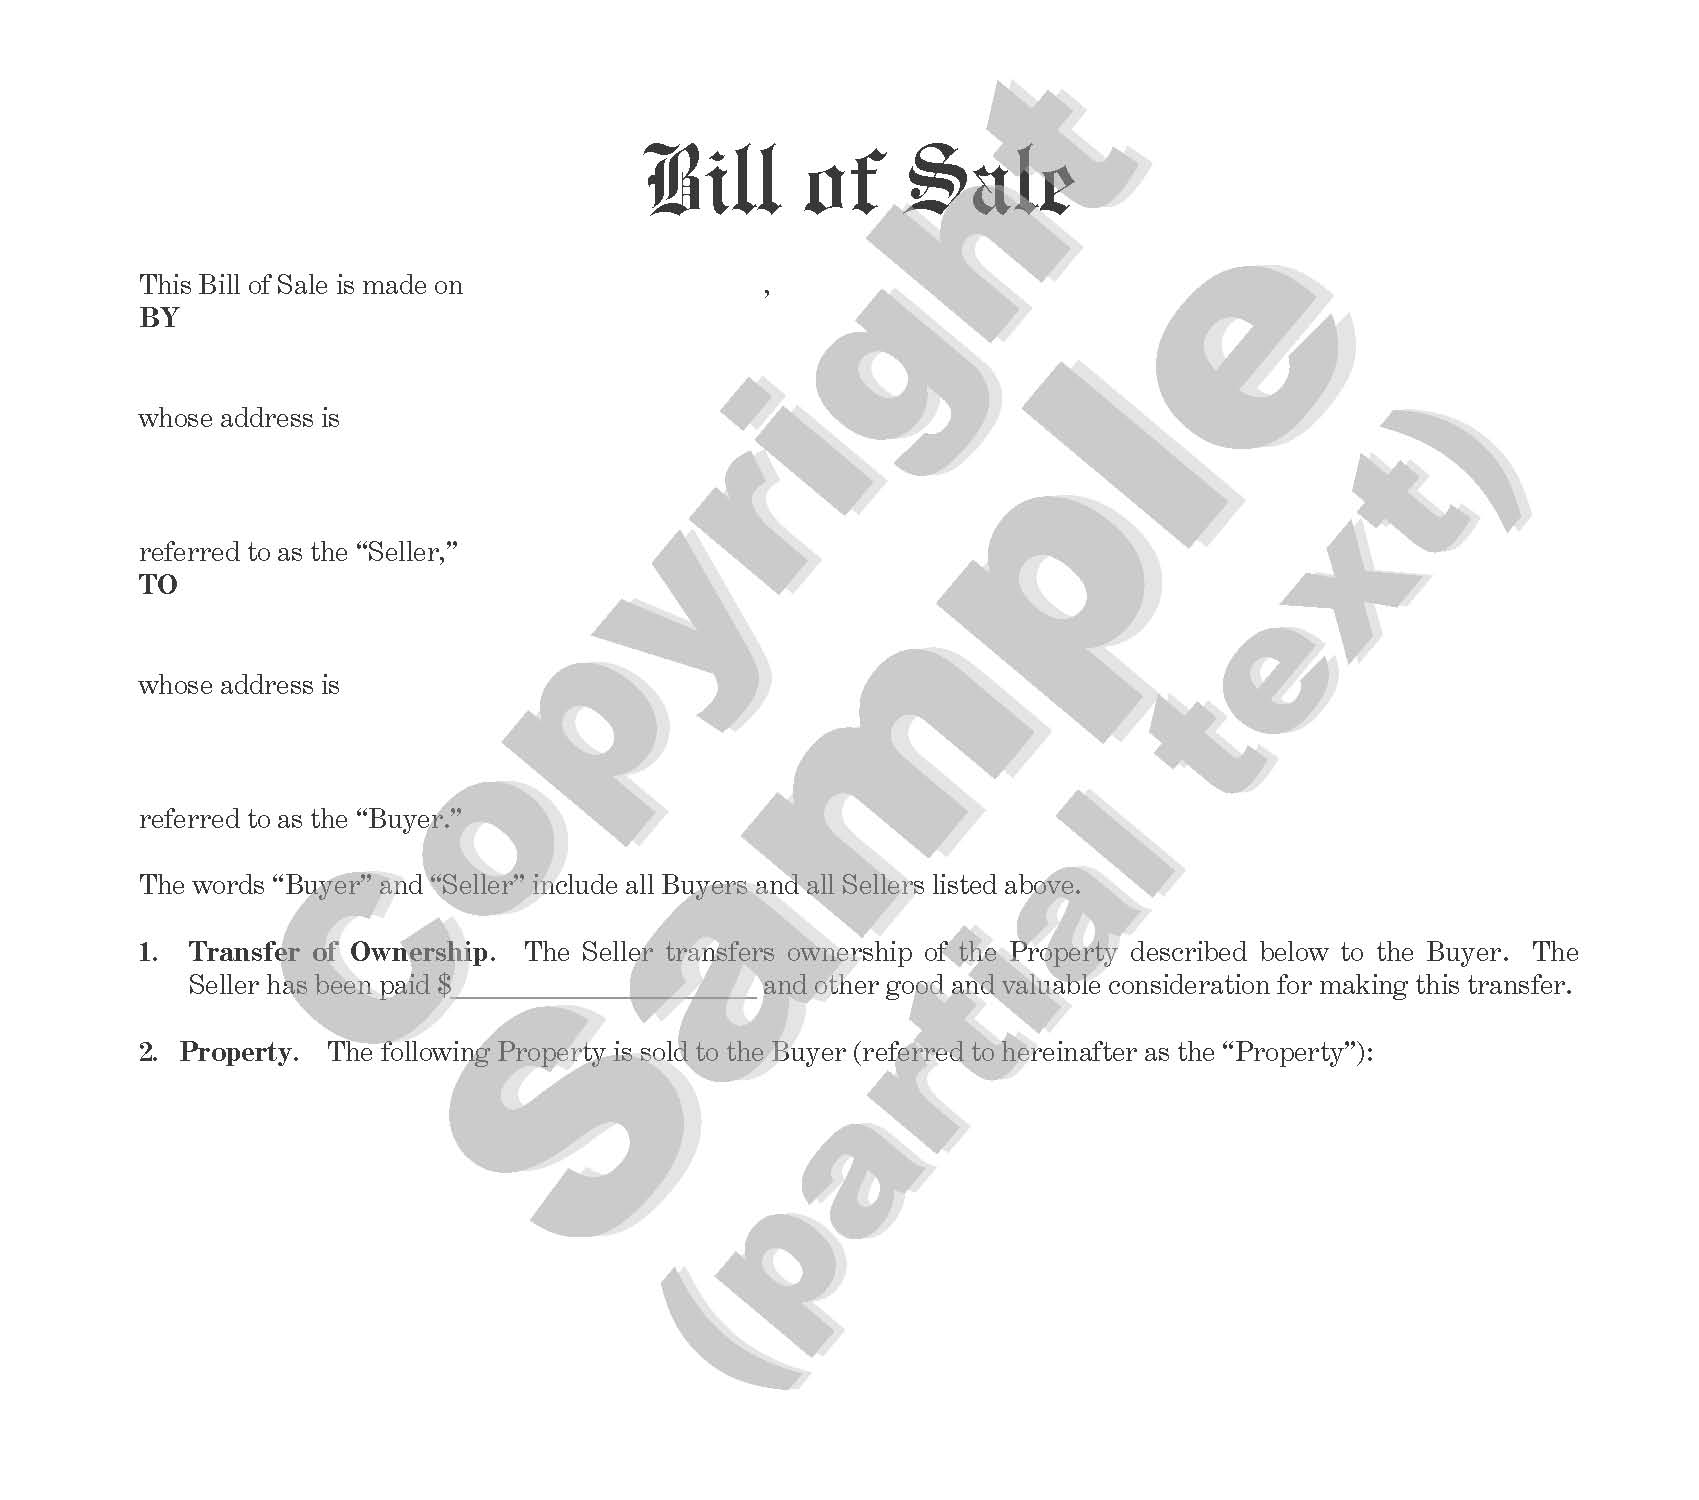 Bill of Sale - Individual or Corporate